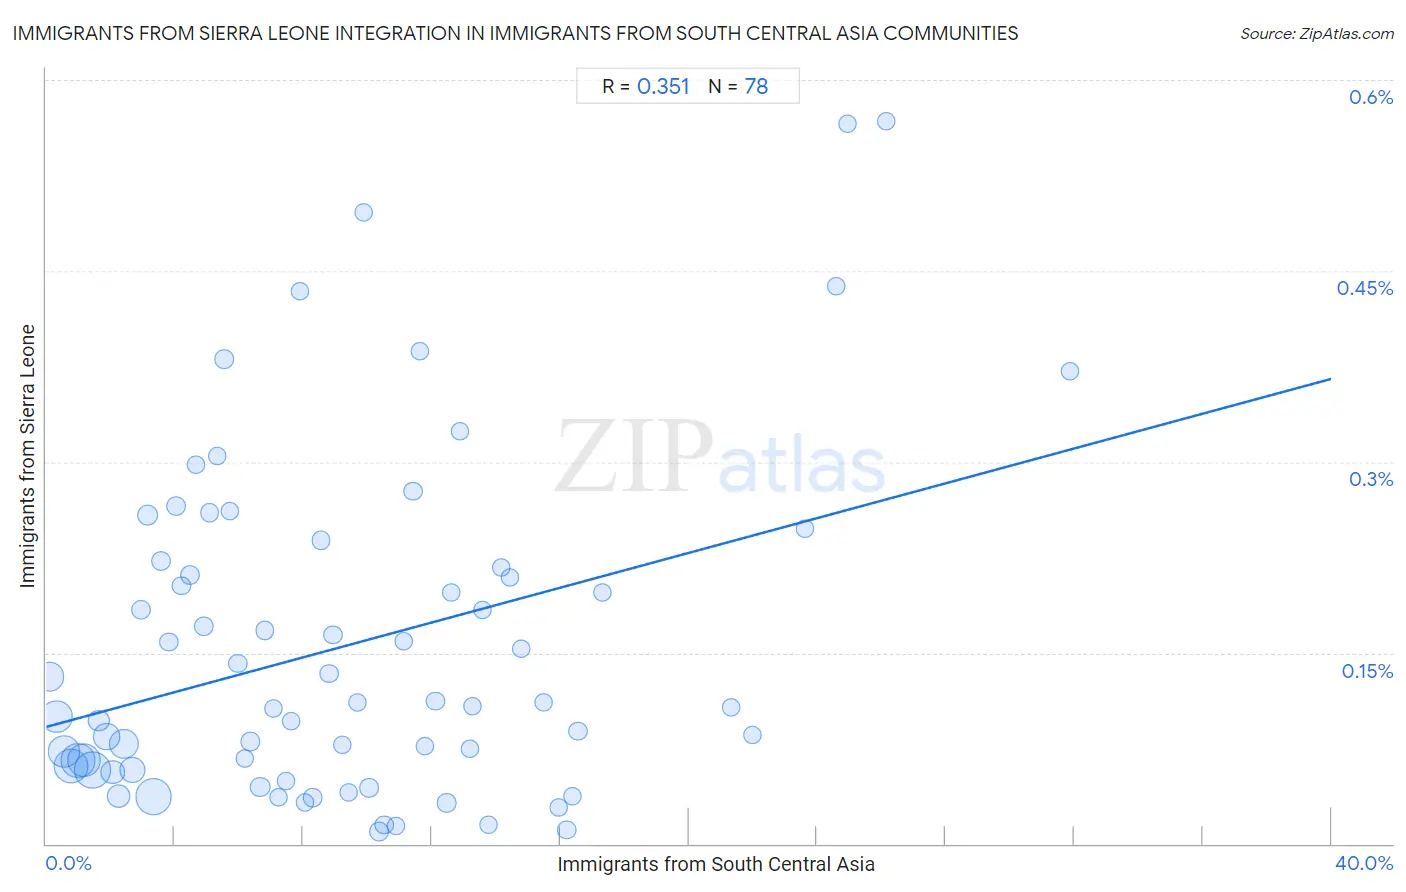 Immigrants from South Central Asia Integration in Immigrants from Sierra Leone Communities